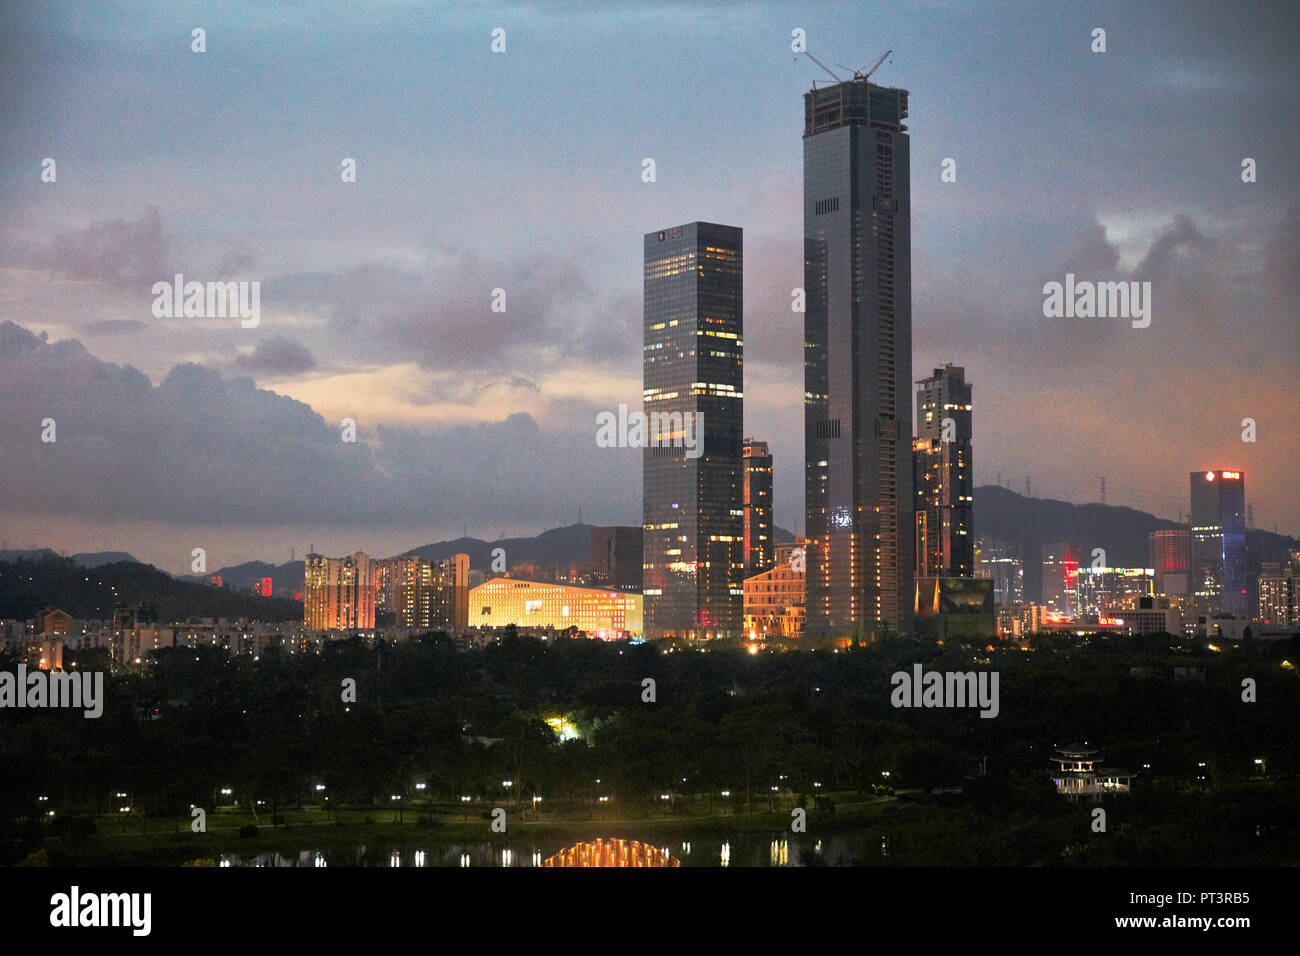 High-rise buildings in Futian District illuminated at dusk. Shenzhen, Guangdong Province, China. Stock Photo